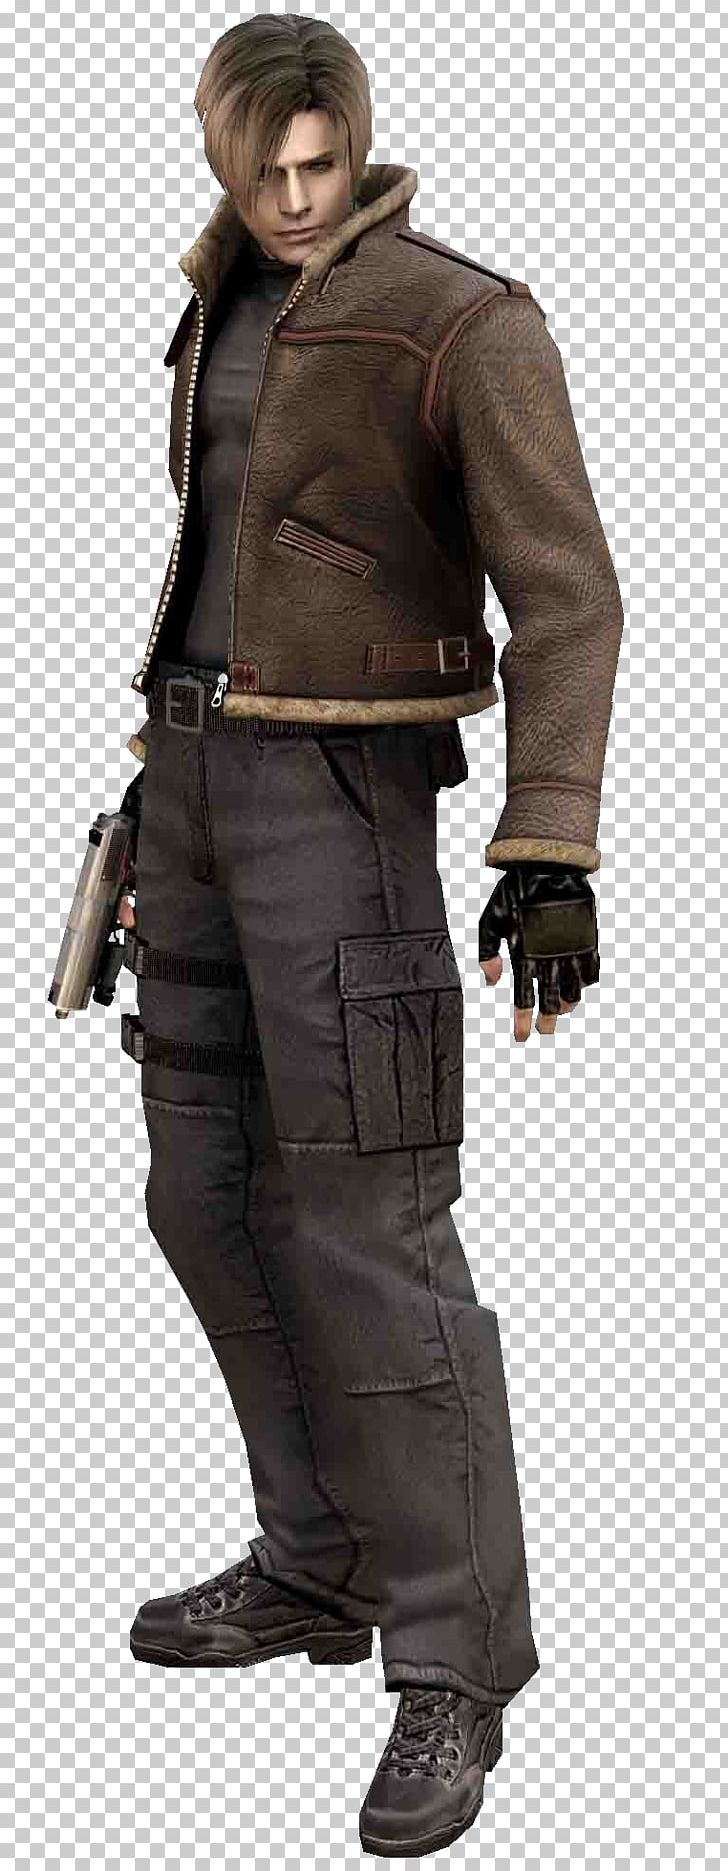 Resident Evil 4 Resident Evil 6 Leon S. Kennedy Resident Evil 5 Ada Wong PNG, Clipart, Action Figure, Ada Wong, Capcom, Cosplay, Costume Free PNG Download